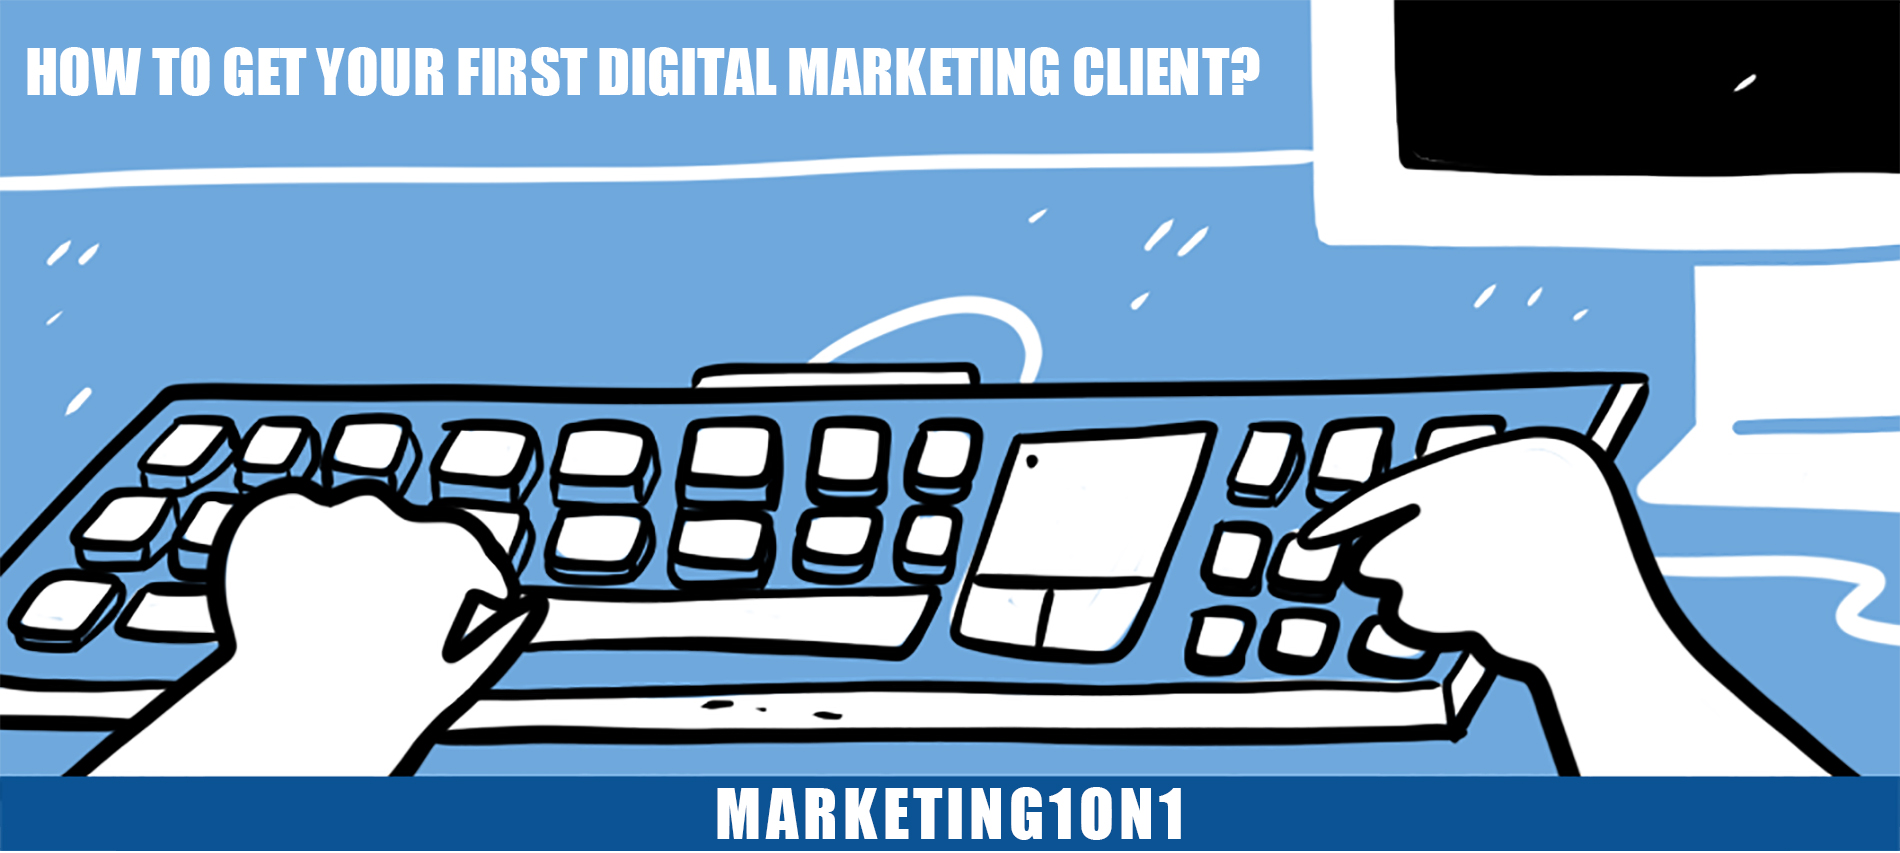 how-to-get-your-first-digital-marketing-client-img.jpg